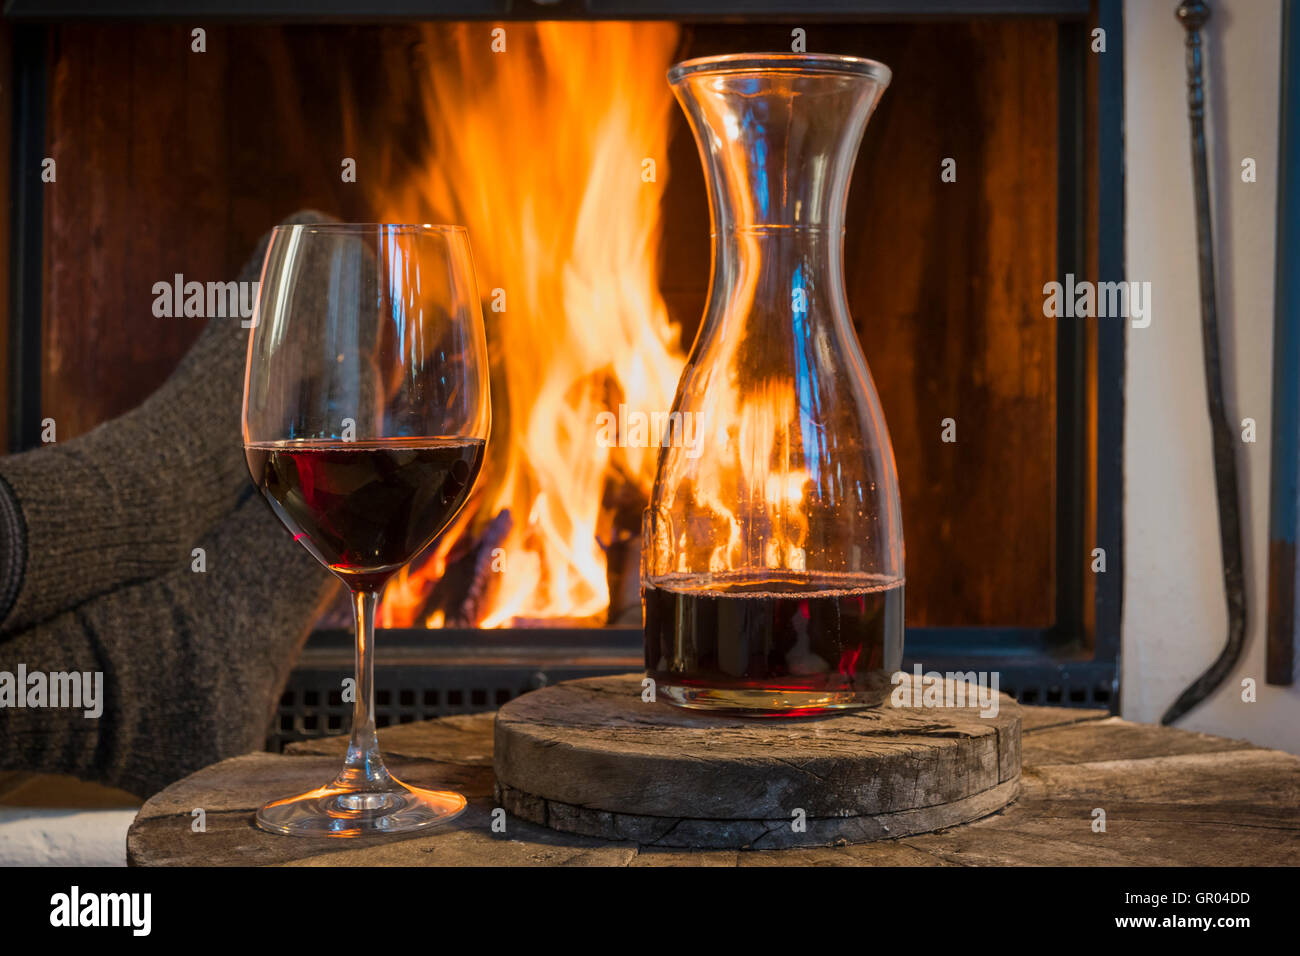 relaxing at fireplace in fall autumn winter with wine Stock Photo